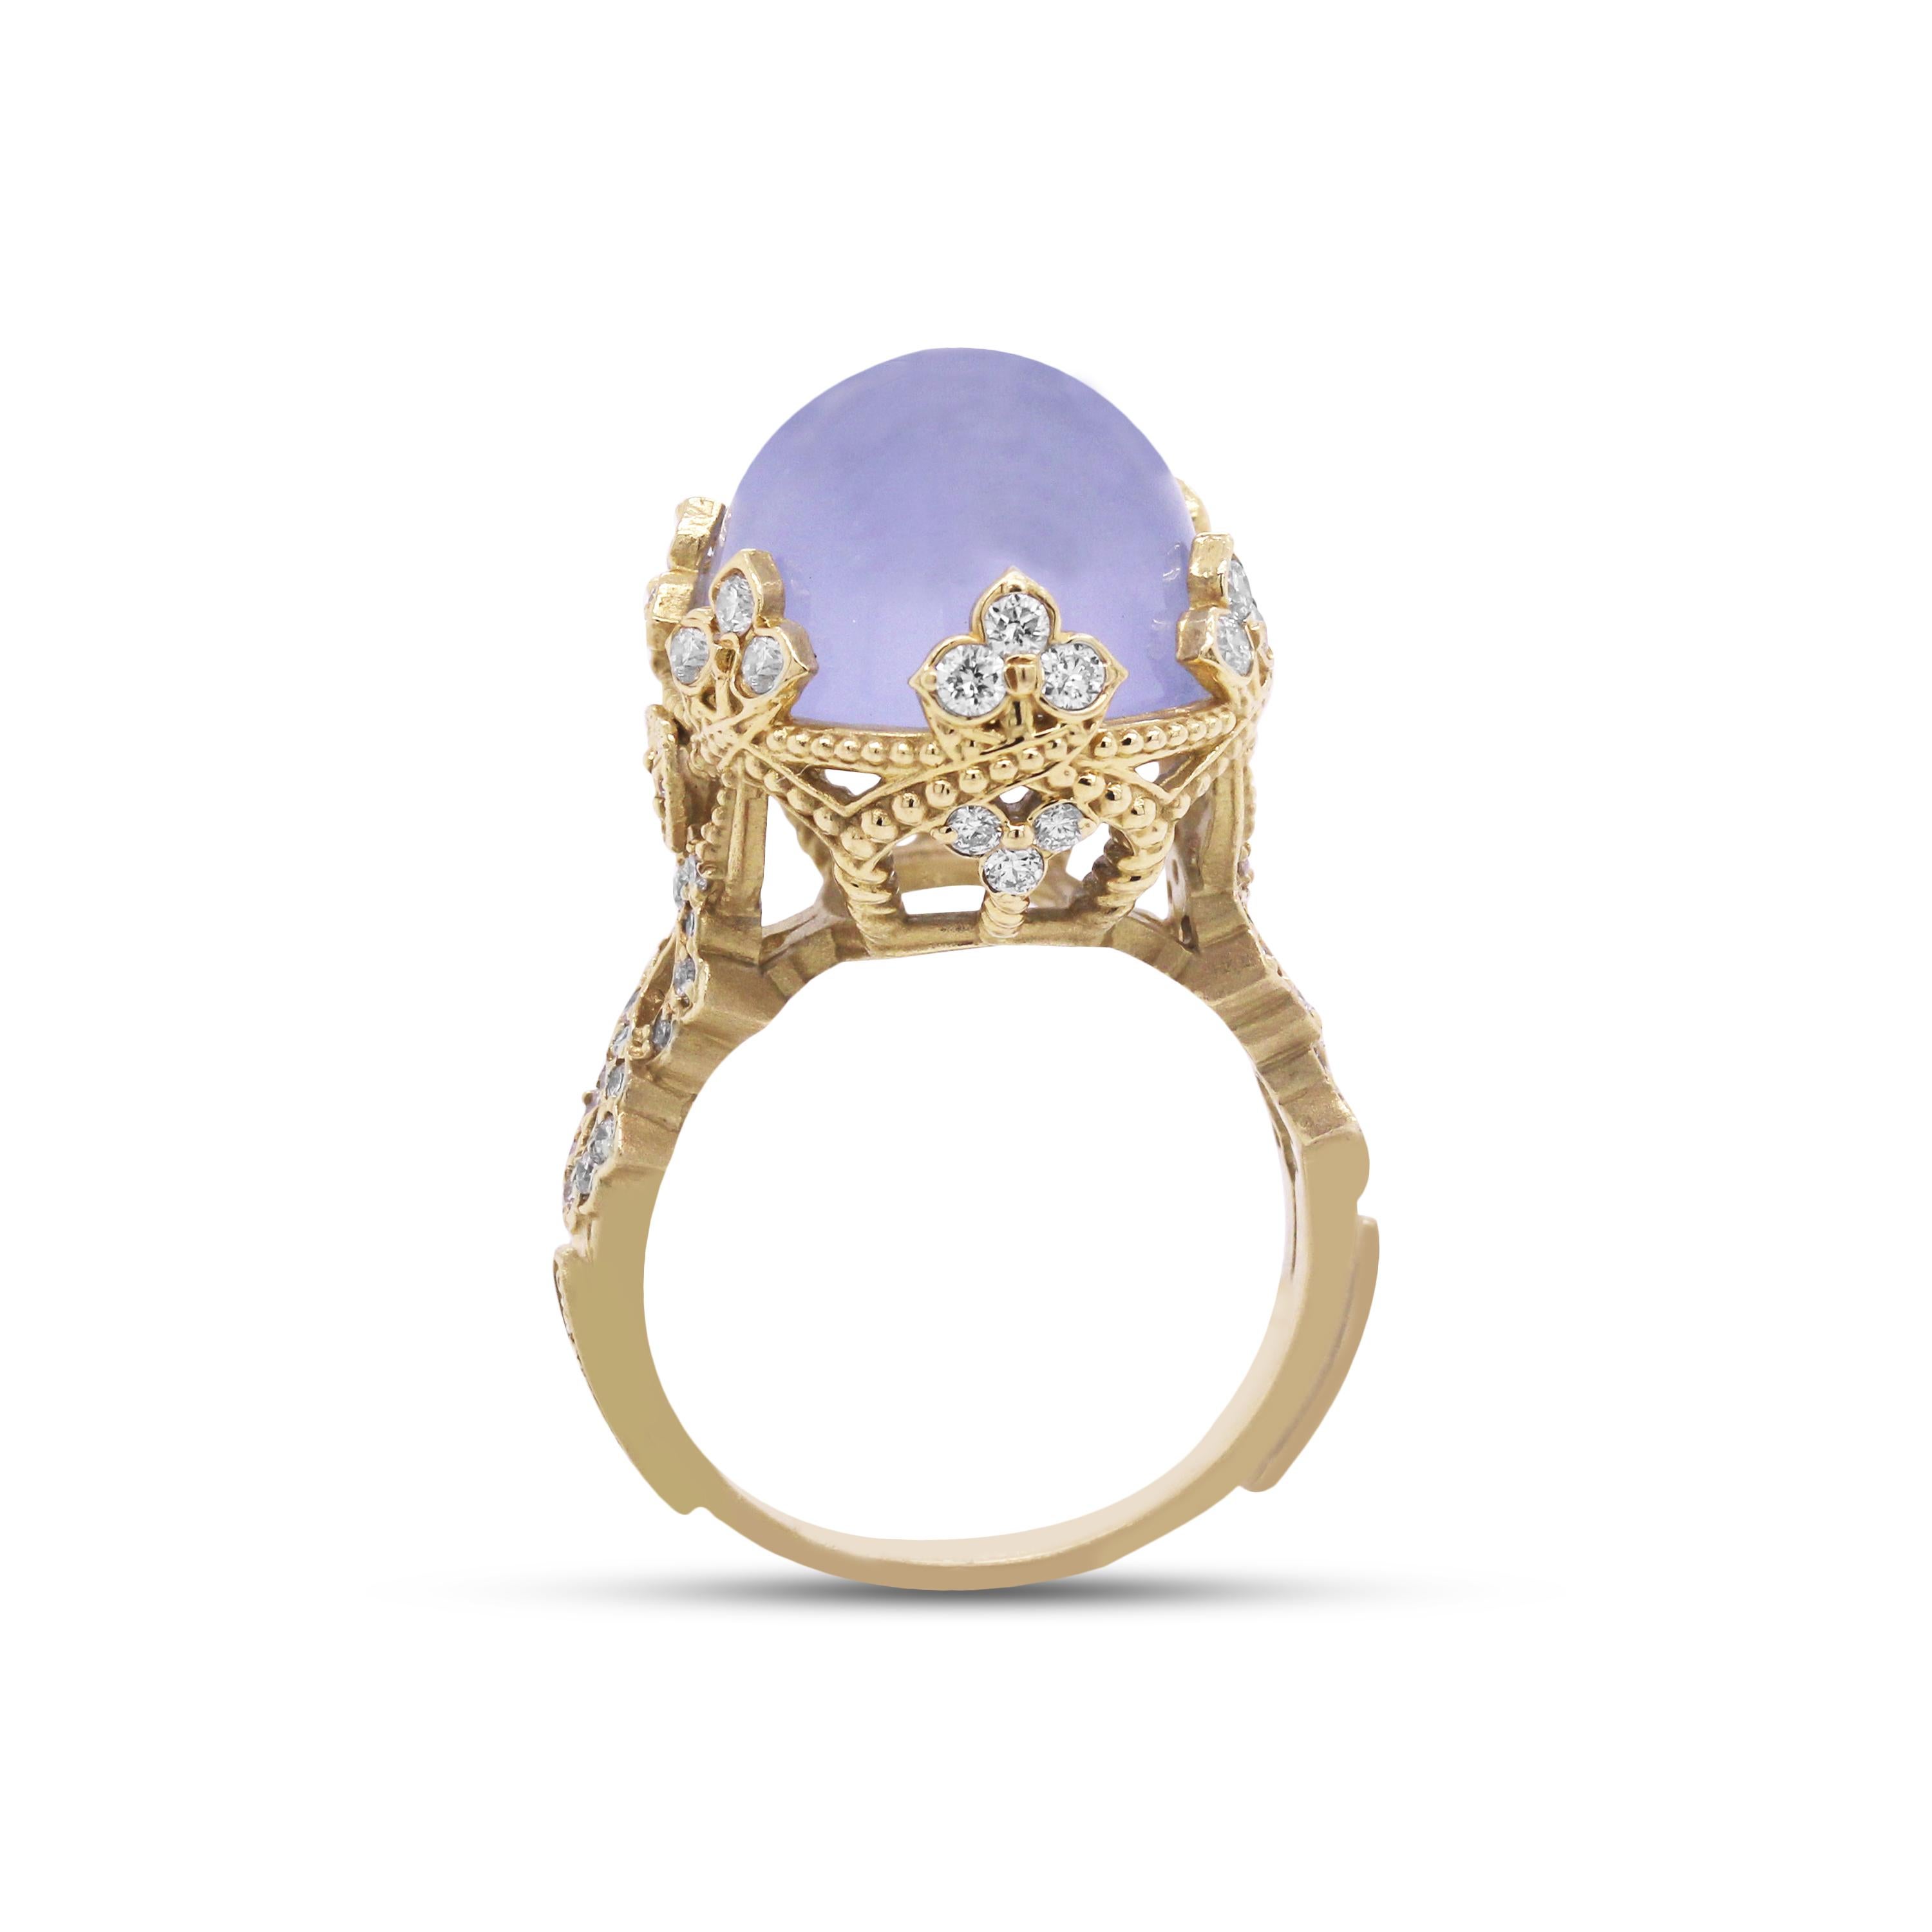 18K Yellow Gold and Diamond Cocktail Ring with Blue Chalcedony center by Stambolian

A unique and everyday ring with all things curve and symmetry. The center Chalcedony is so vibrant in color and goes beautifully with the yellow gold. (This ring is